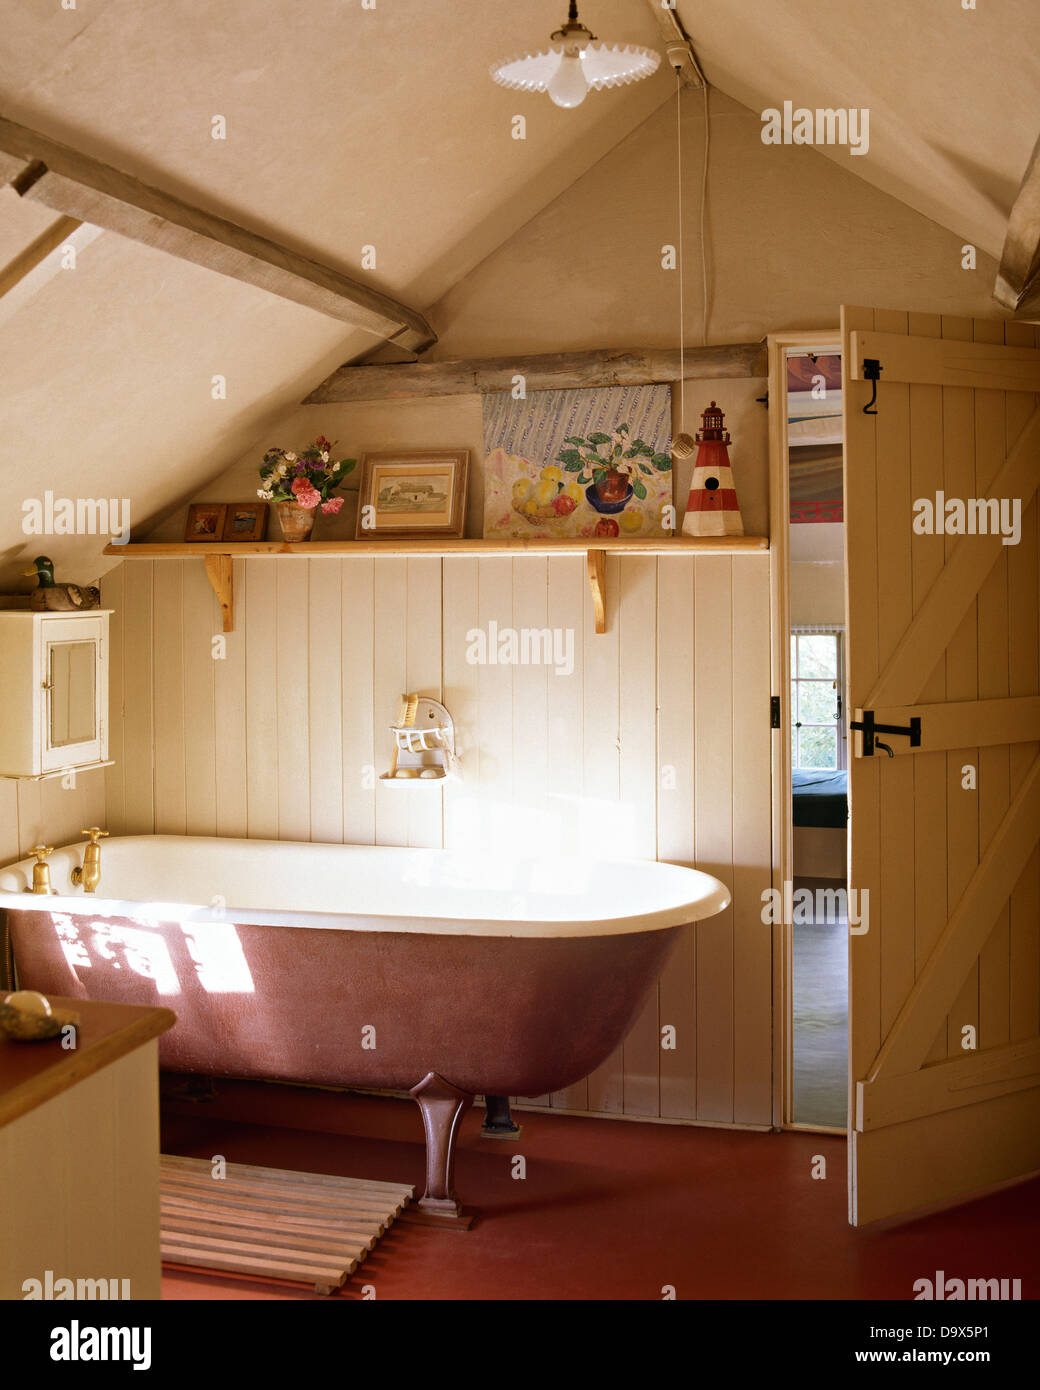 Roll-top bath in small attic bathroom with tongue+groove paneling Stock Photo